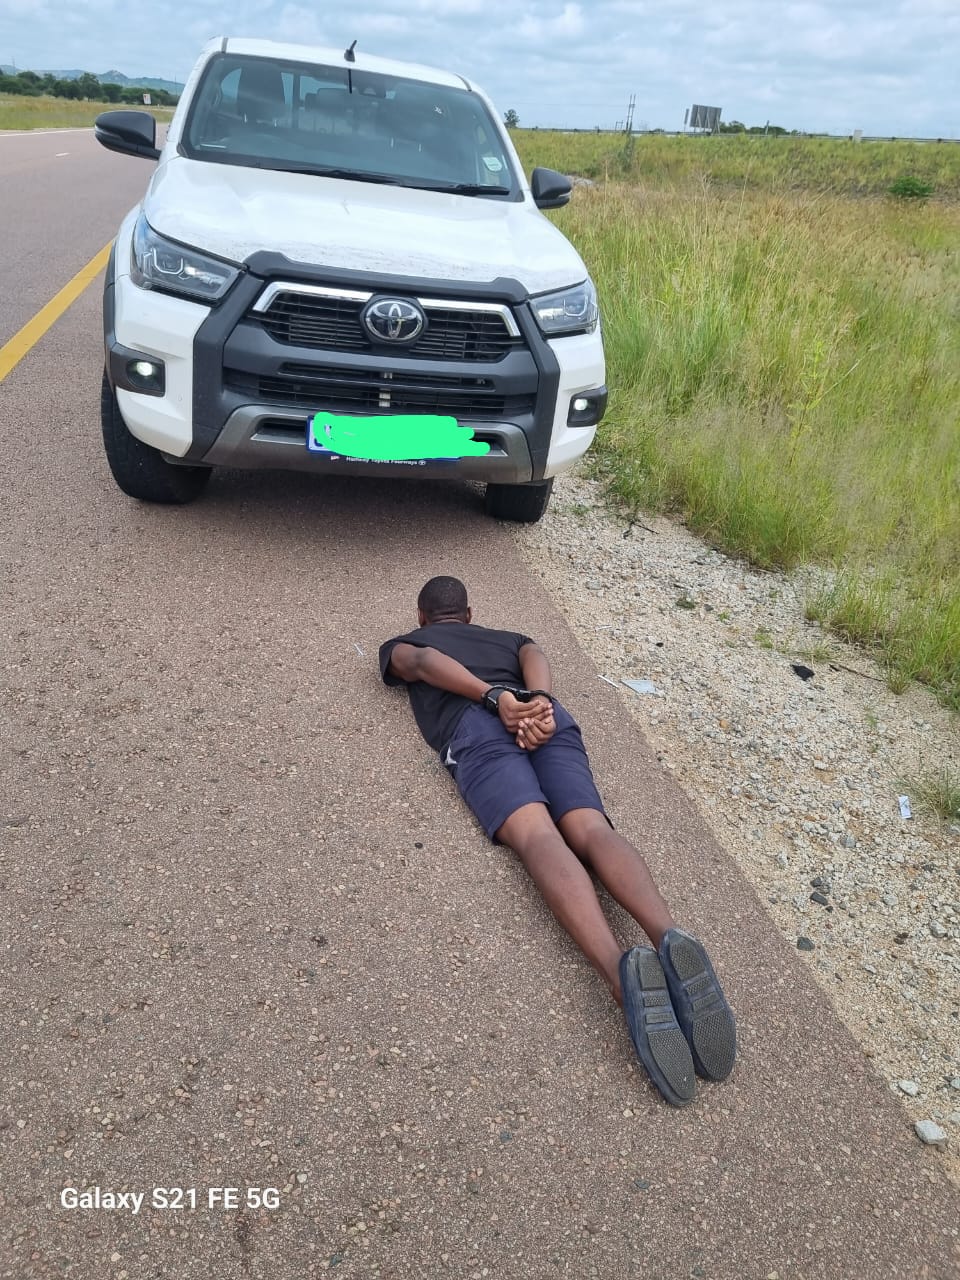 Suspect arrested for possession of stolen vehicle along the N1 near Peter Mokaba Stadium